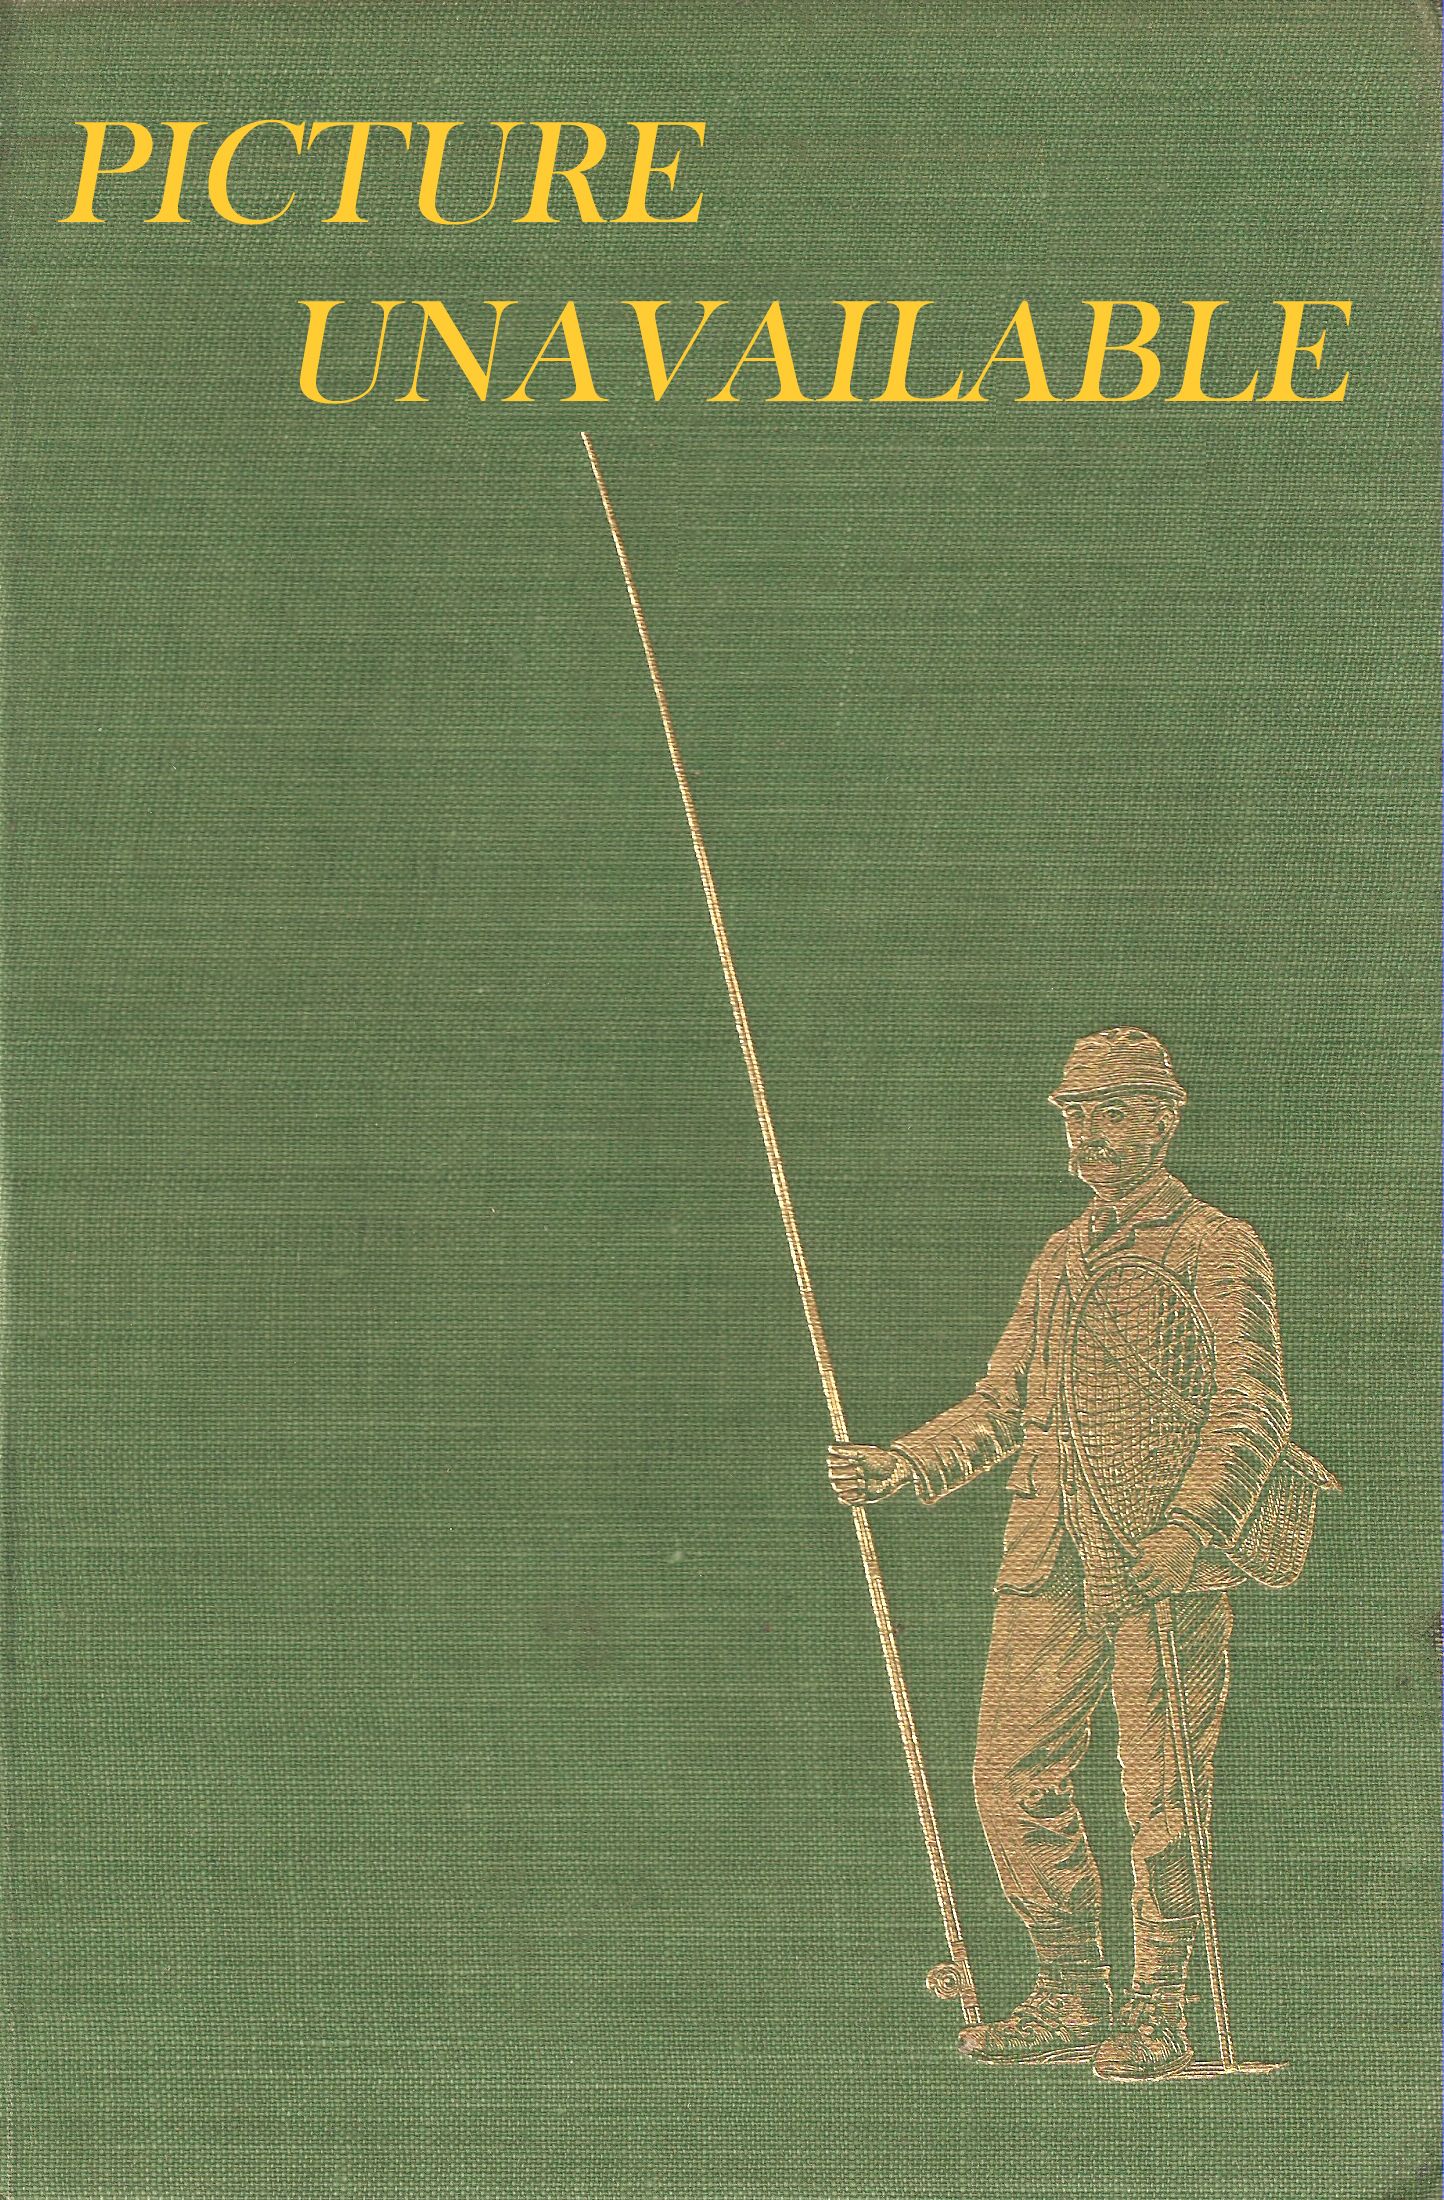 THE CONFIDENT FLY FISHER. By Cunliffe R. Pearce.